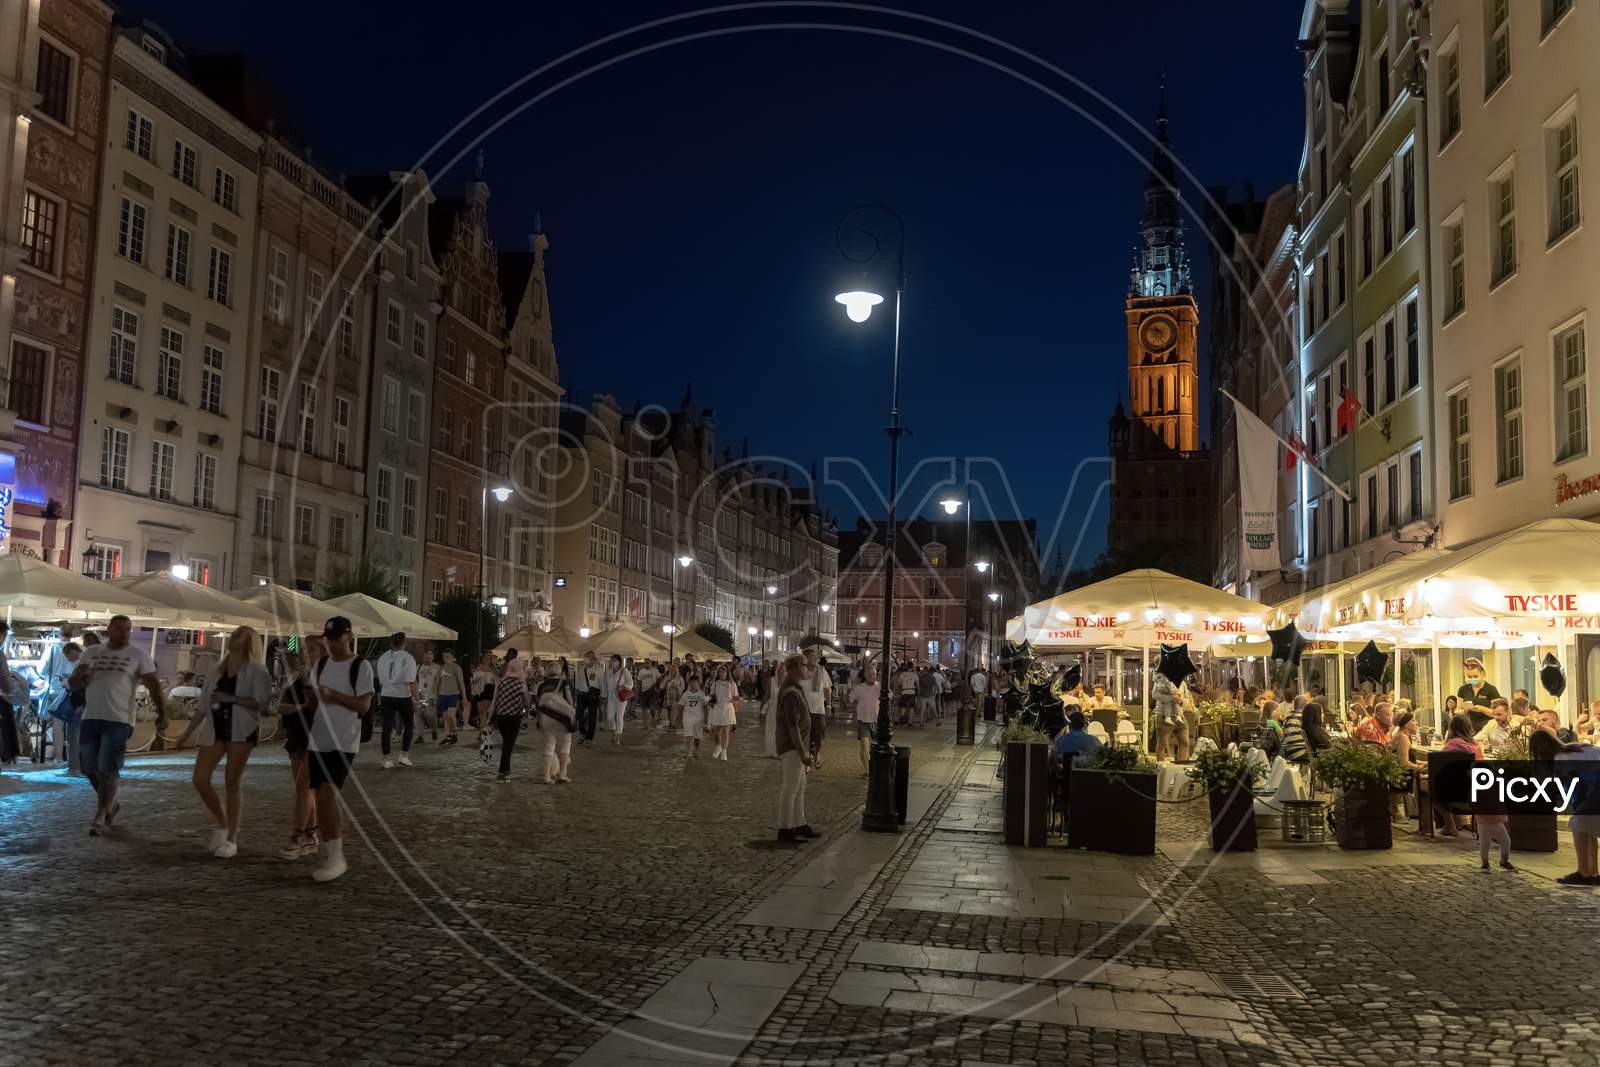 Gdansk, North Poland - August 13, 2020: Wide Angle Shot Of City Center Main Square And People Walking During Covid 19 Time